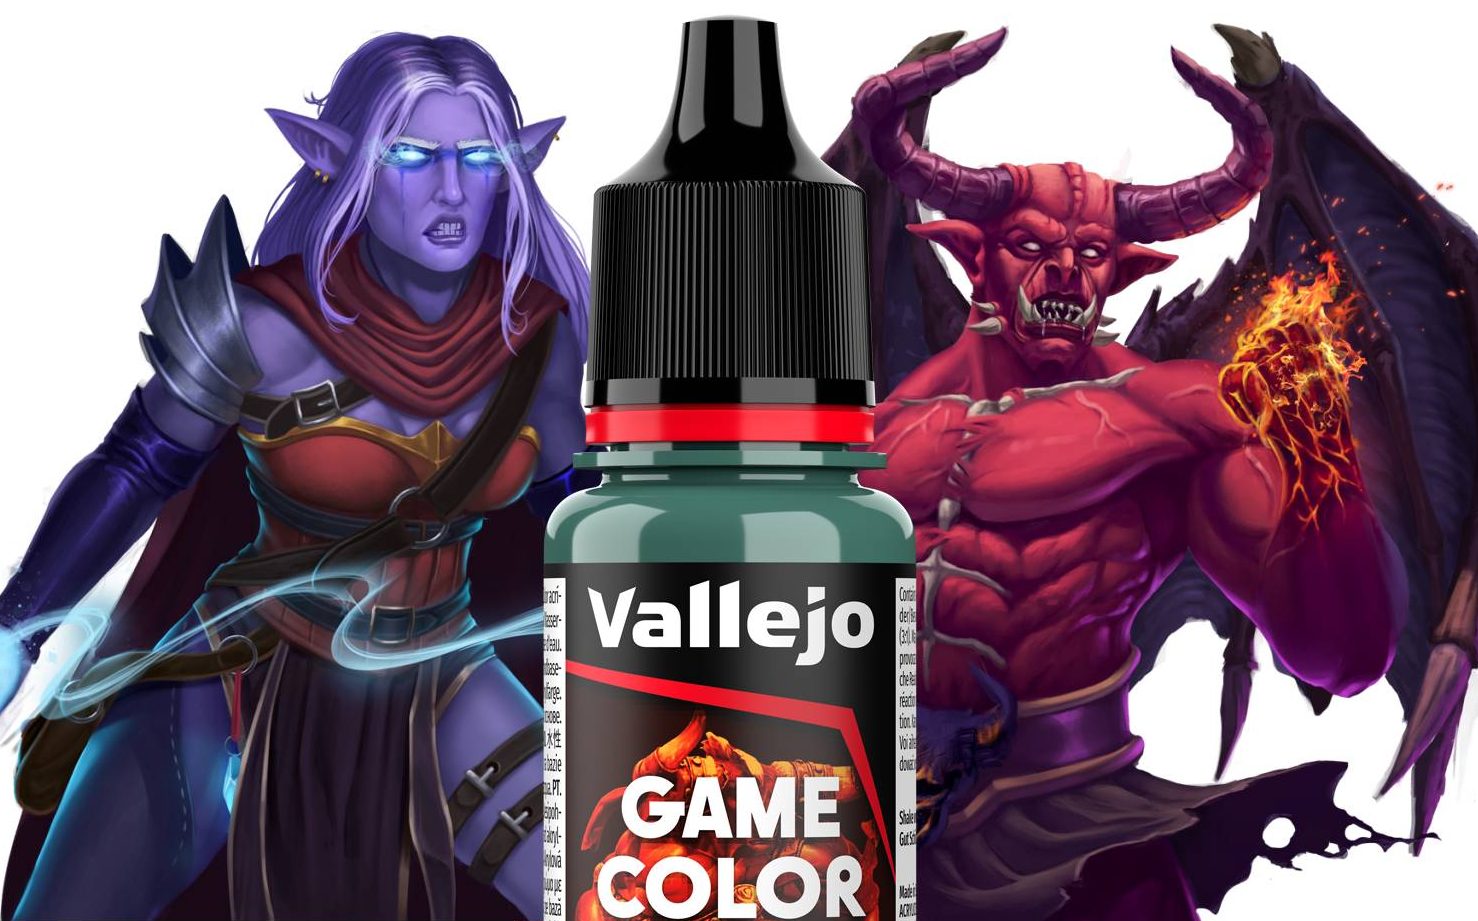 New Vallejo Xpress and Game Color tests - Which color do you like